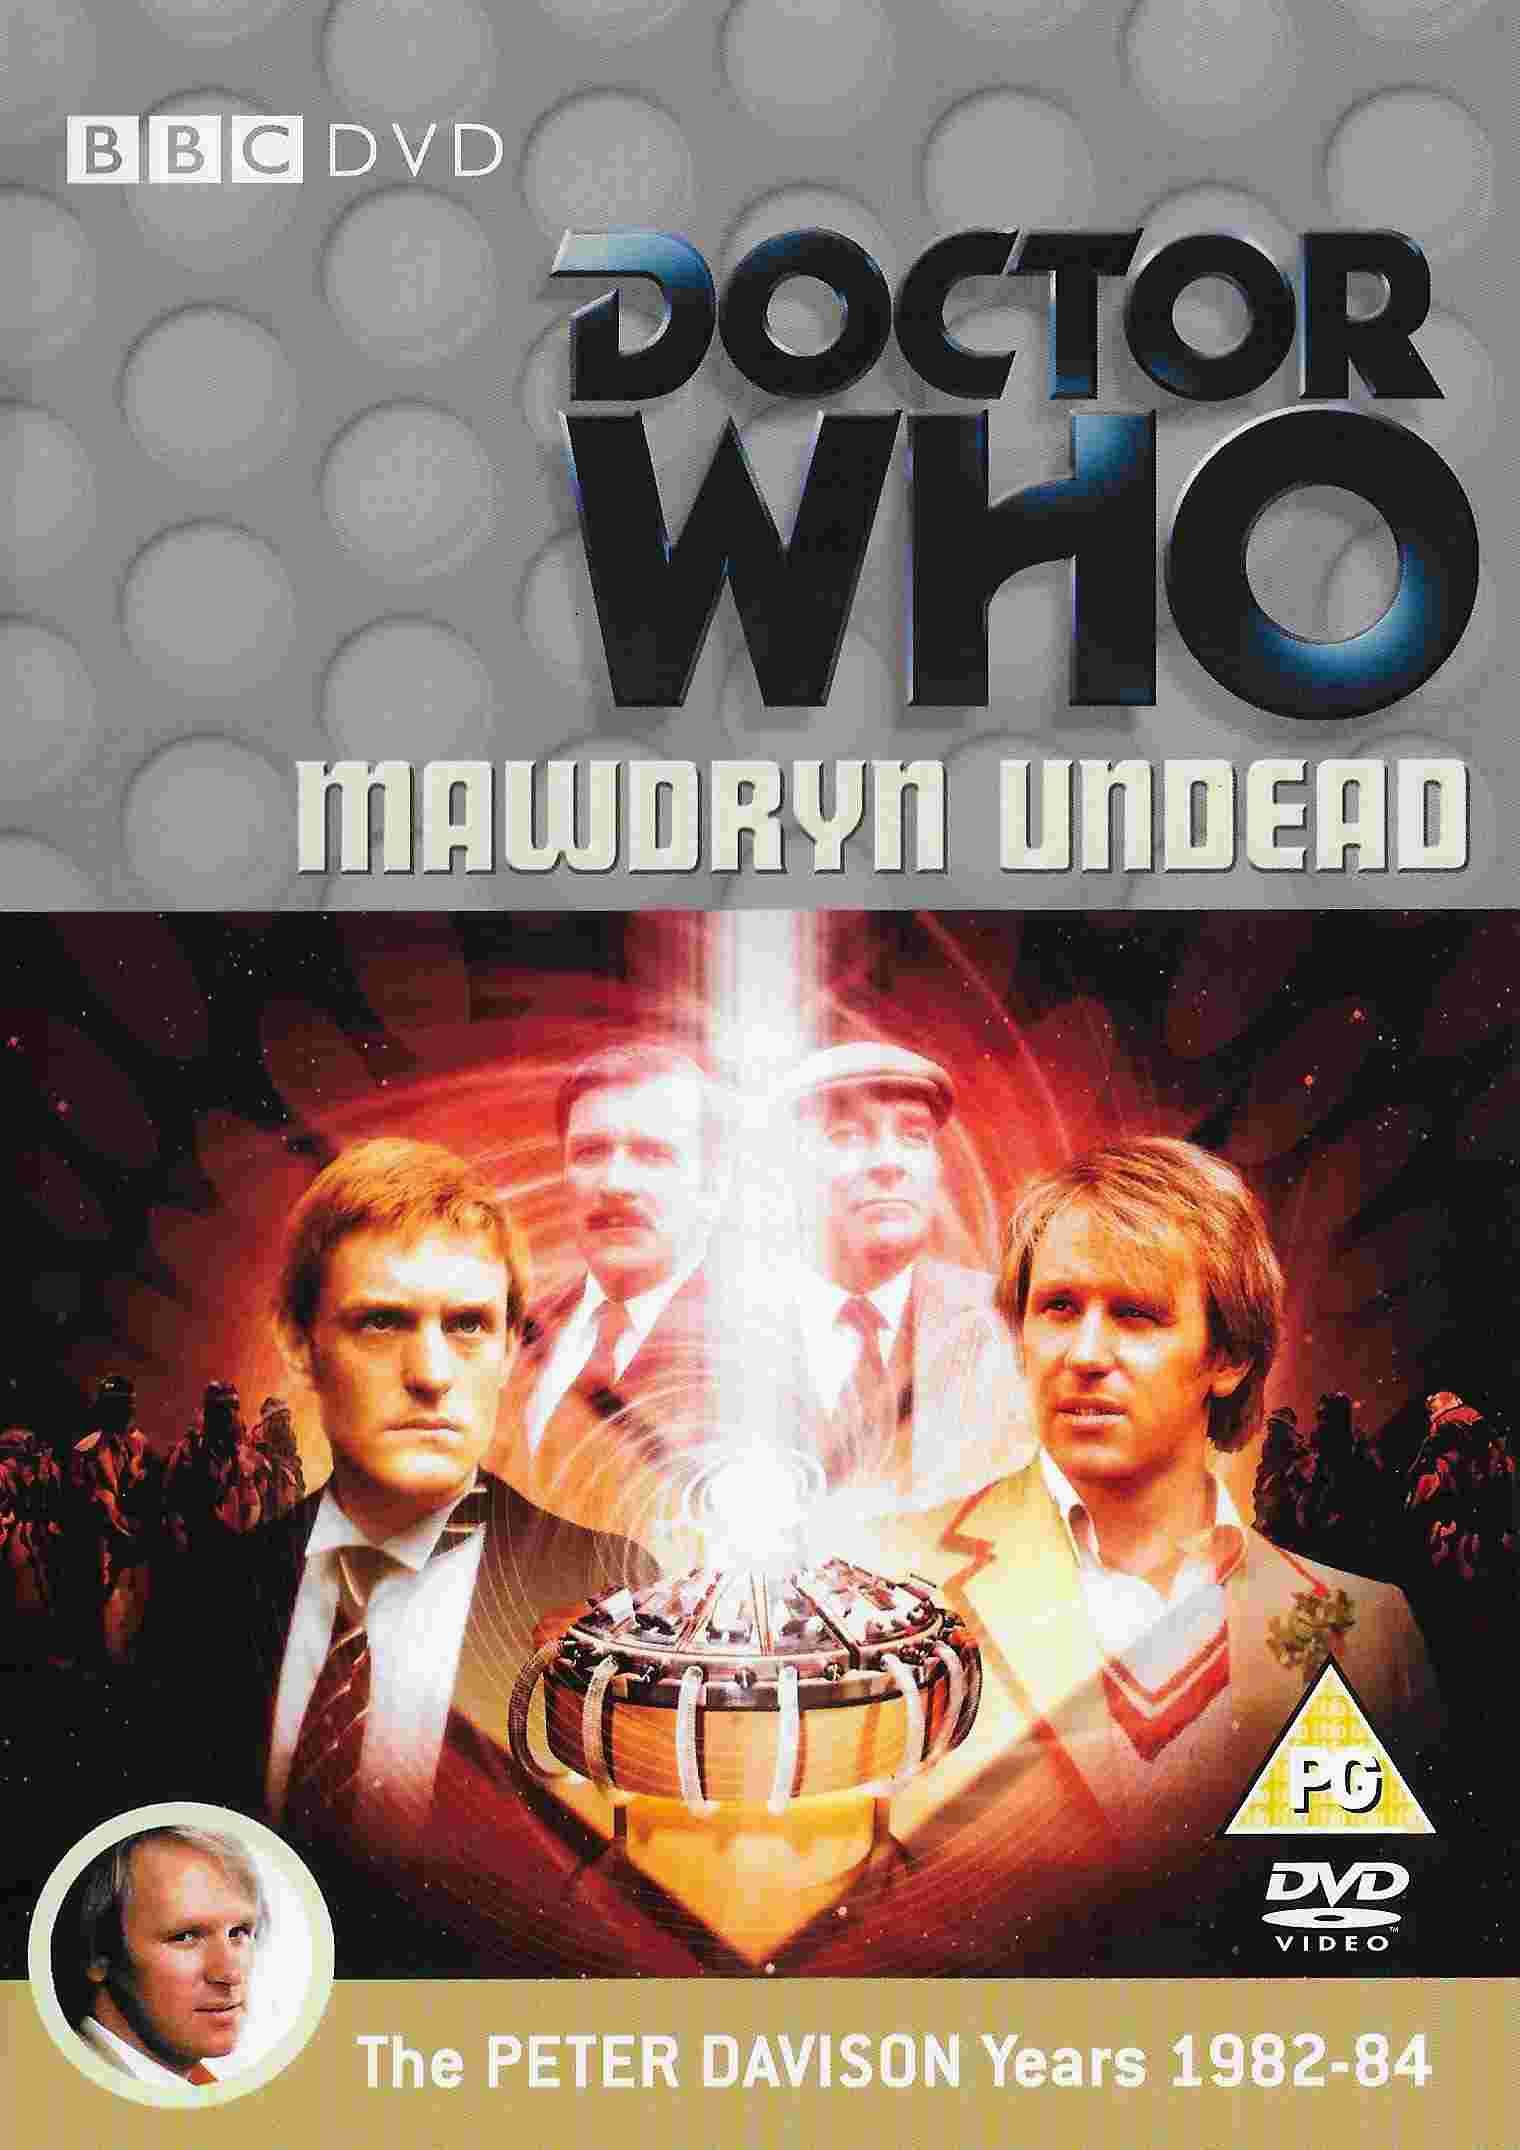 Picture of BBCDVD 2596A Doctor Who - Mawdryn Undead by artist Peter Grimwade from the BBC dvds - Records and Tapes library